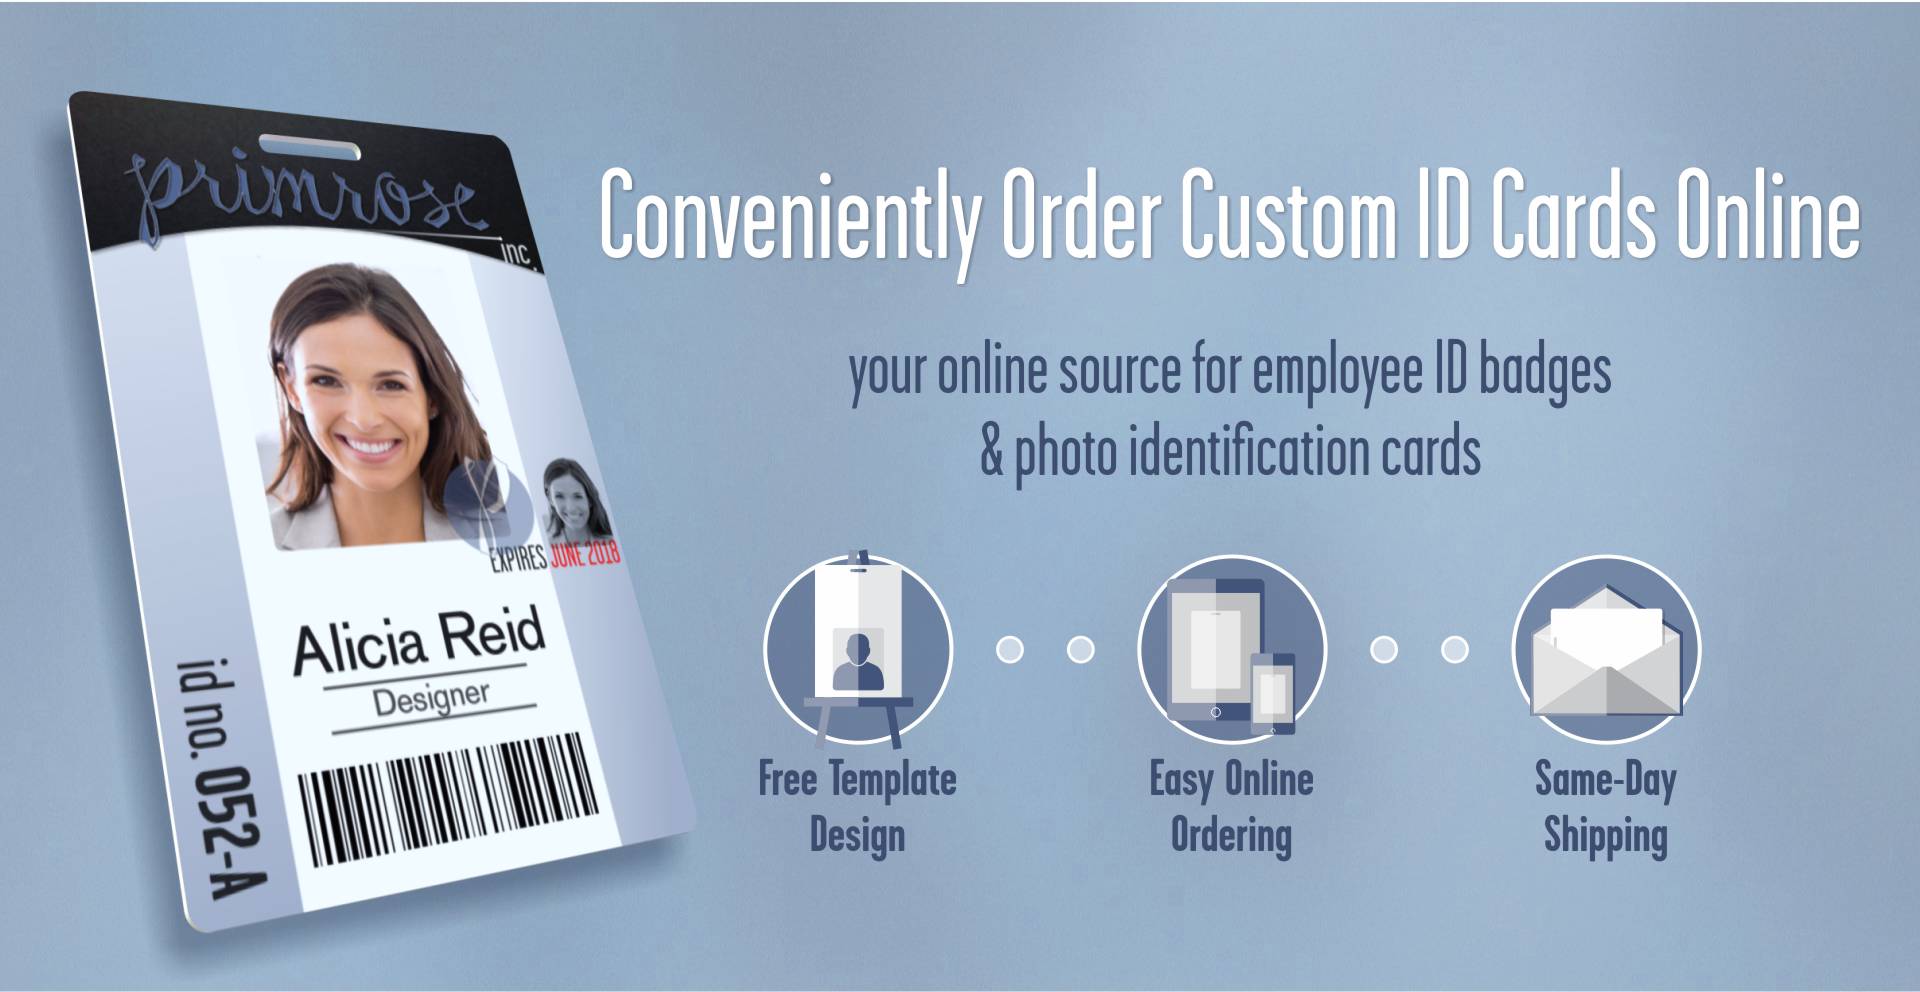 ID Badges & Cards Ordered Online With Free Design